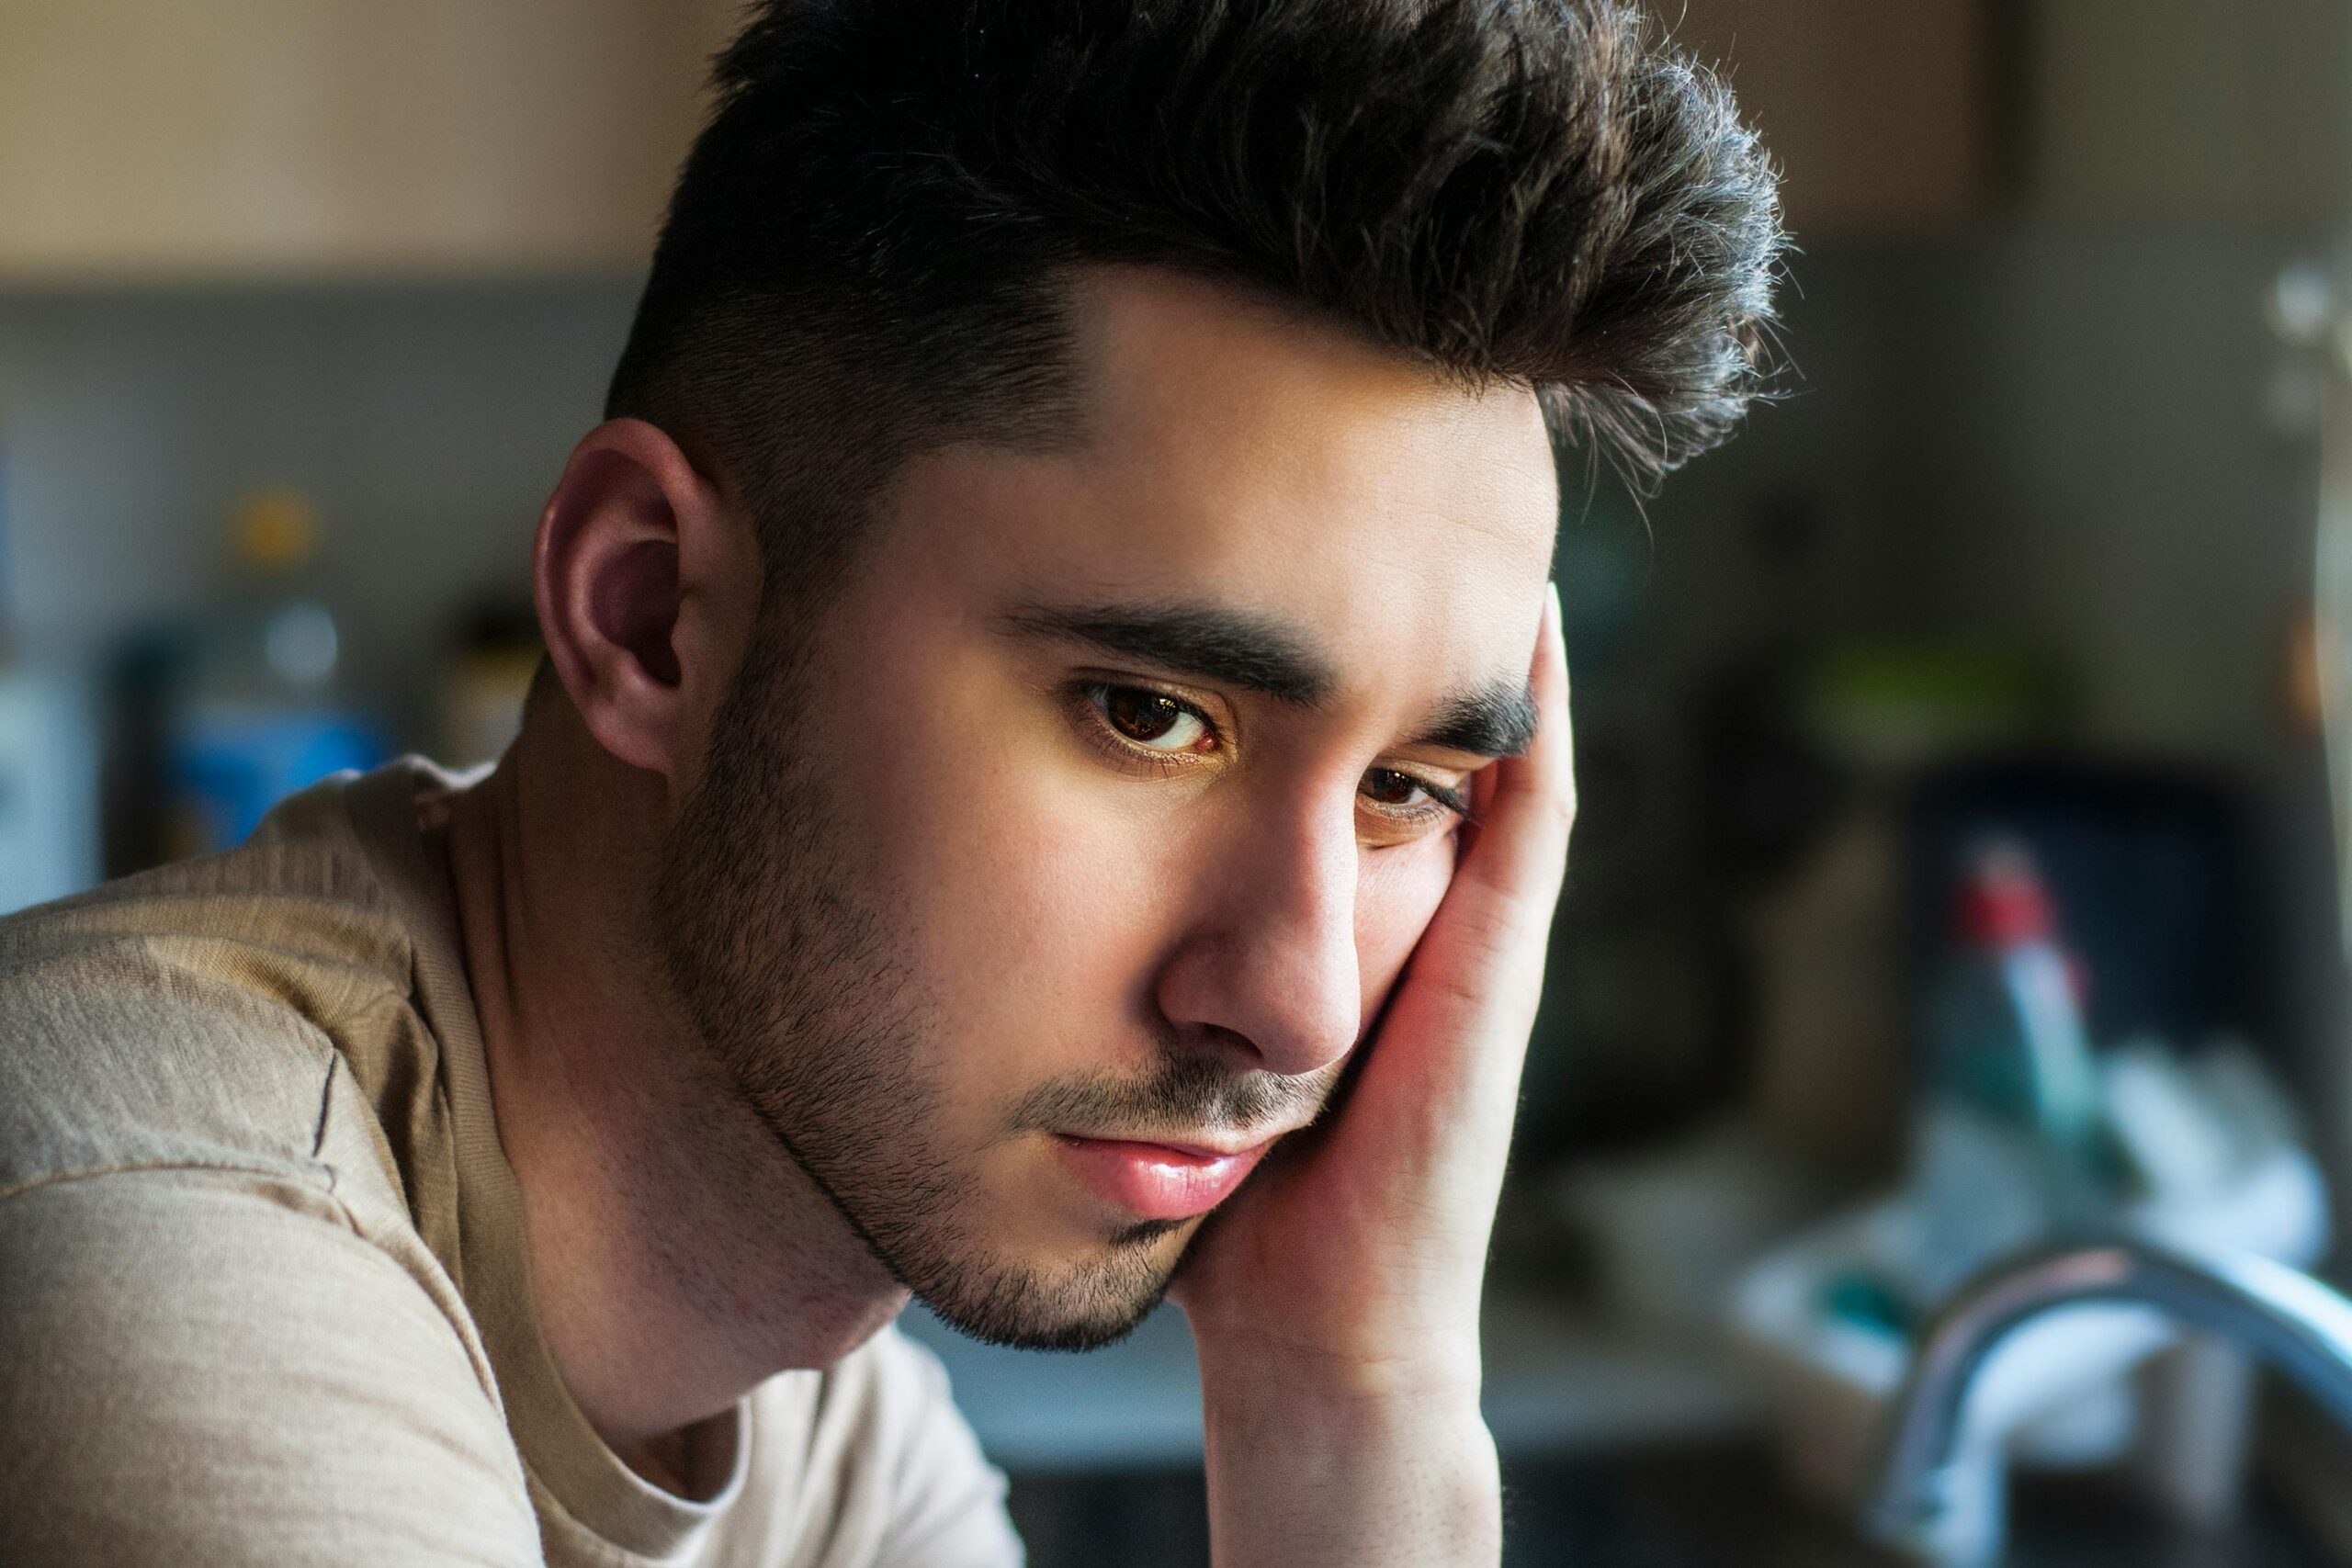 depressed, teen male wanting mental health support